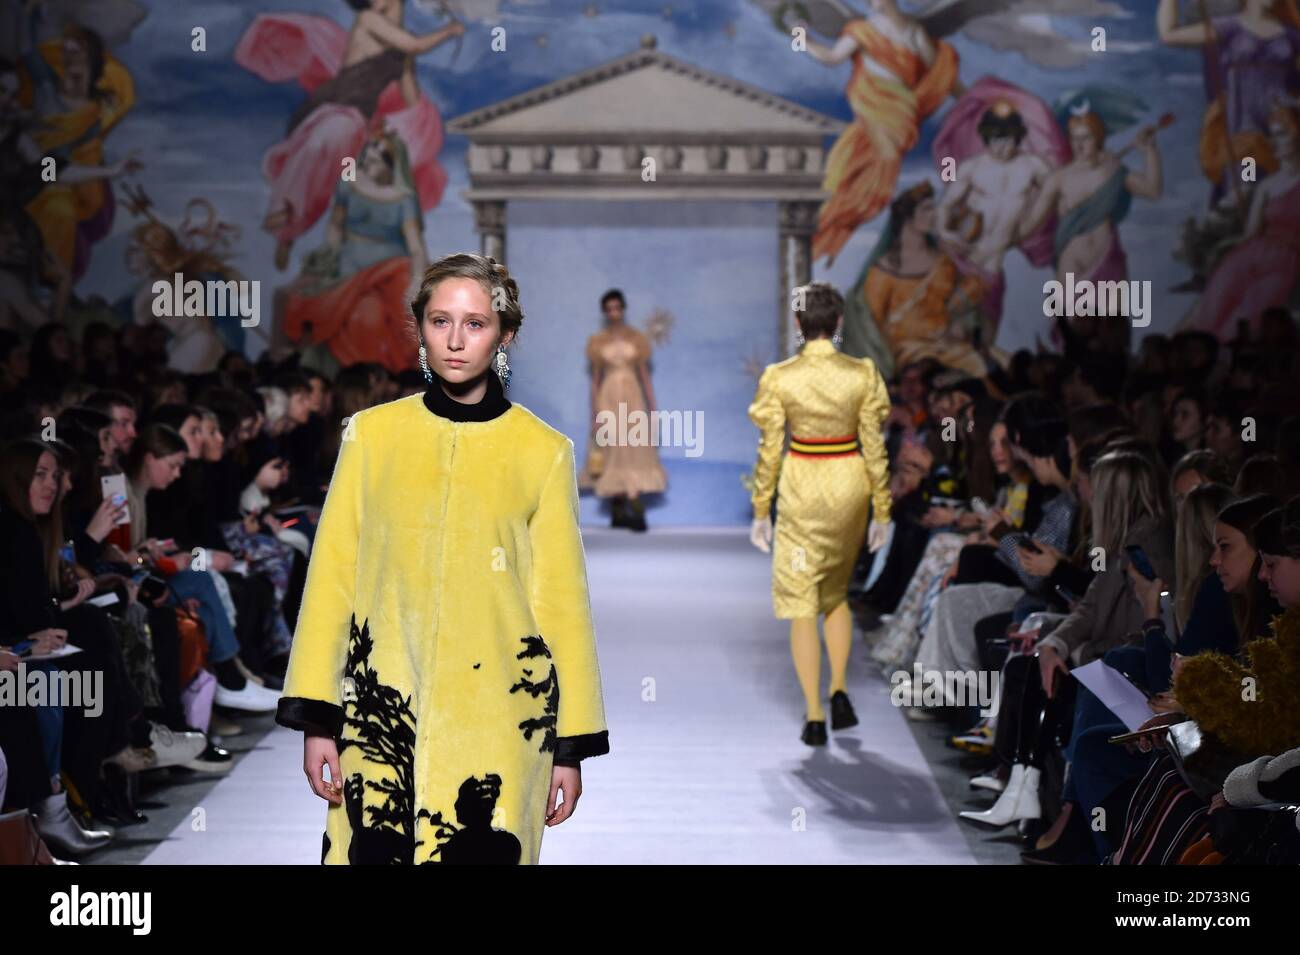 Models on the catwalk during the Shrimps fashion show, held at the Ambika P3 as part of London Fashion Week A/W 2019. Picture date: Tuesday February 19, 2018. Photo credit should read: Matt Crossick/Empics Stock Photo